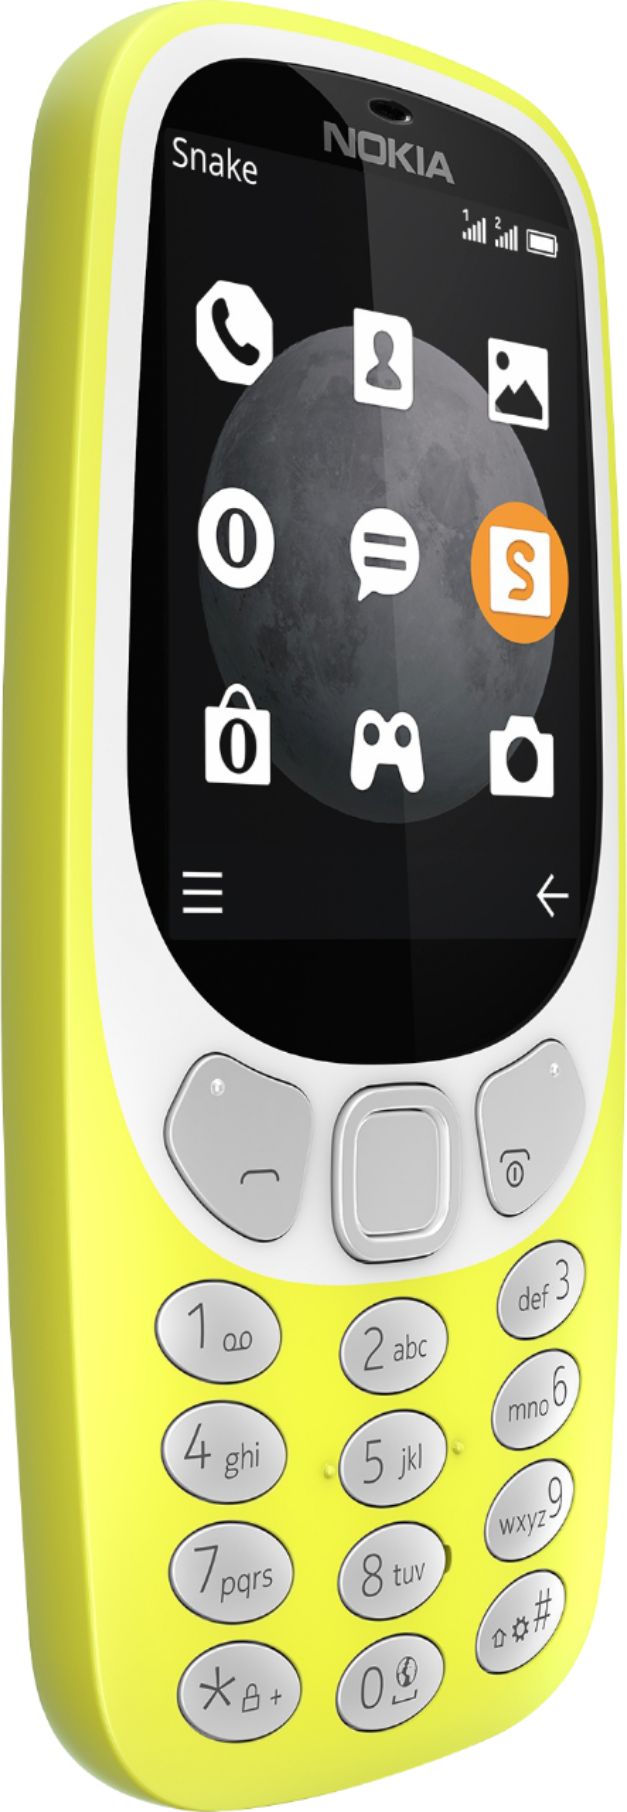 Snake' Isn't the Only Game You Can Play on the Nokia 3310